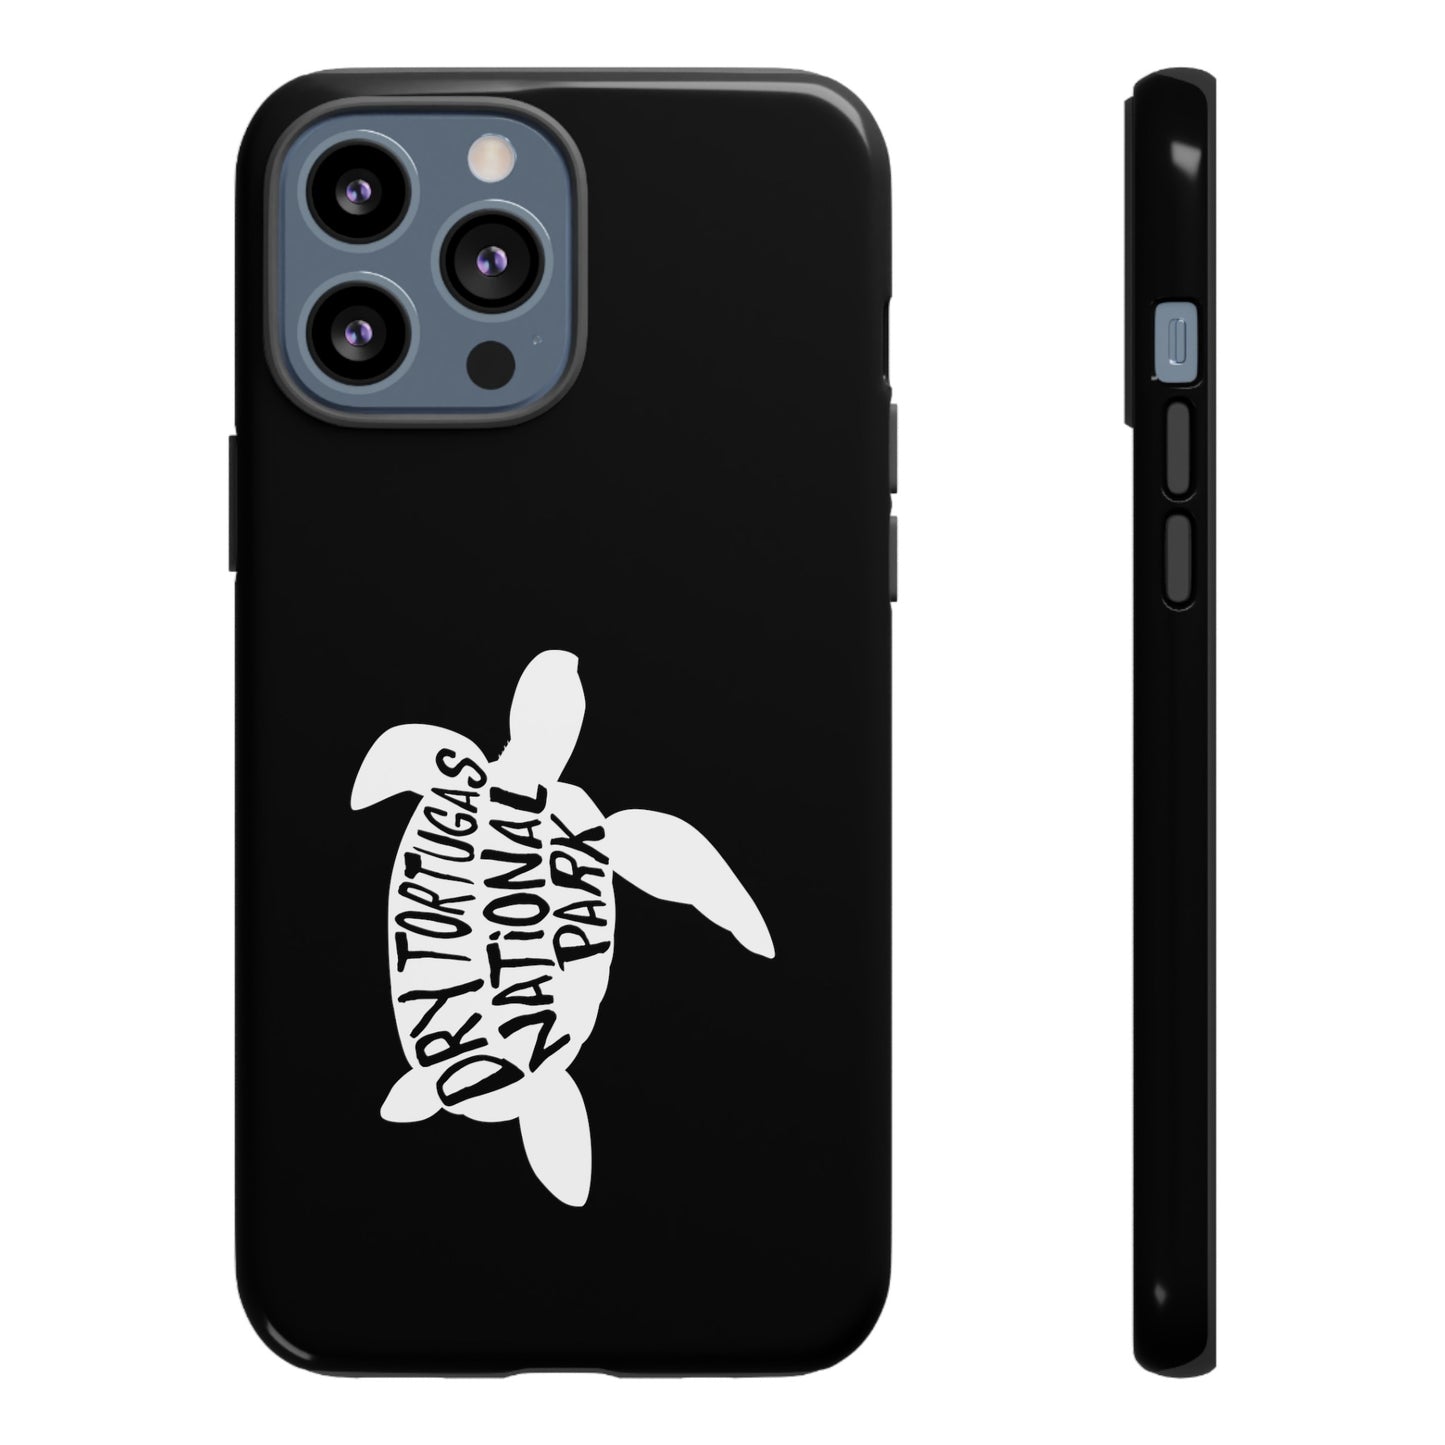 Dry Tortugas National Park Phone Case - Turtle Design